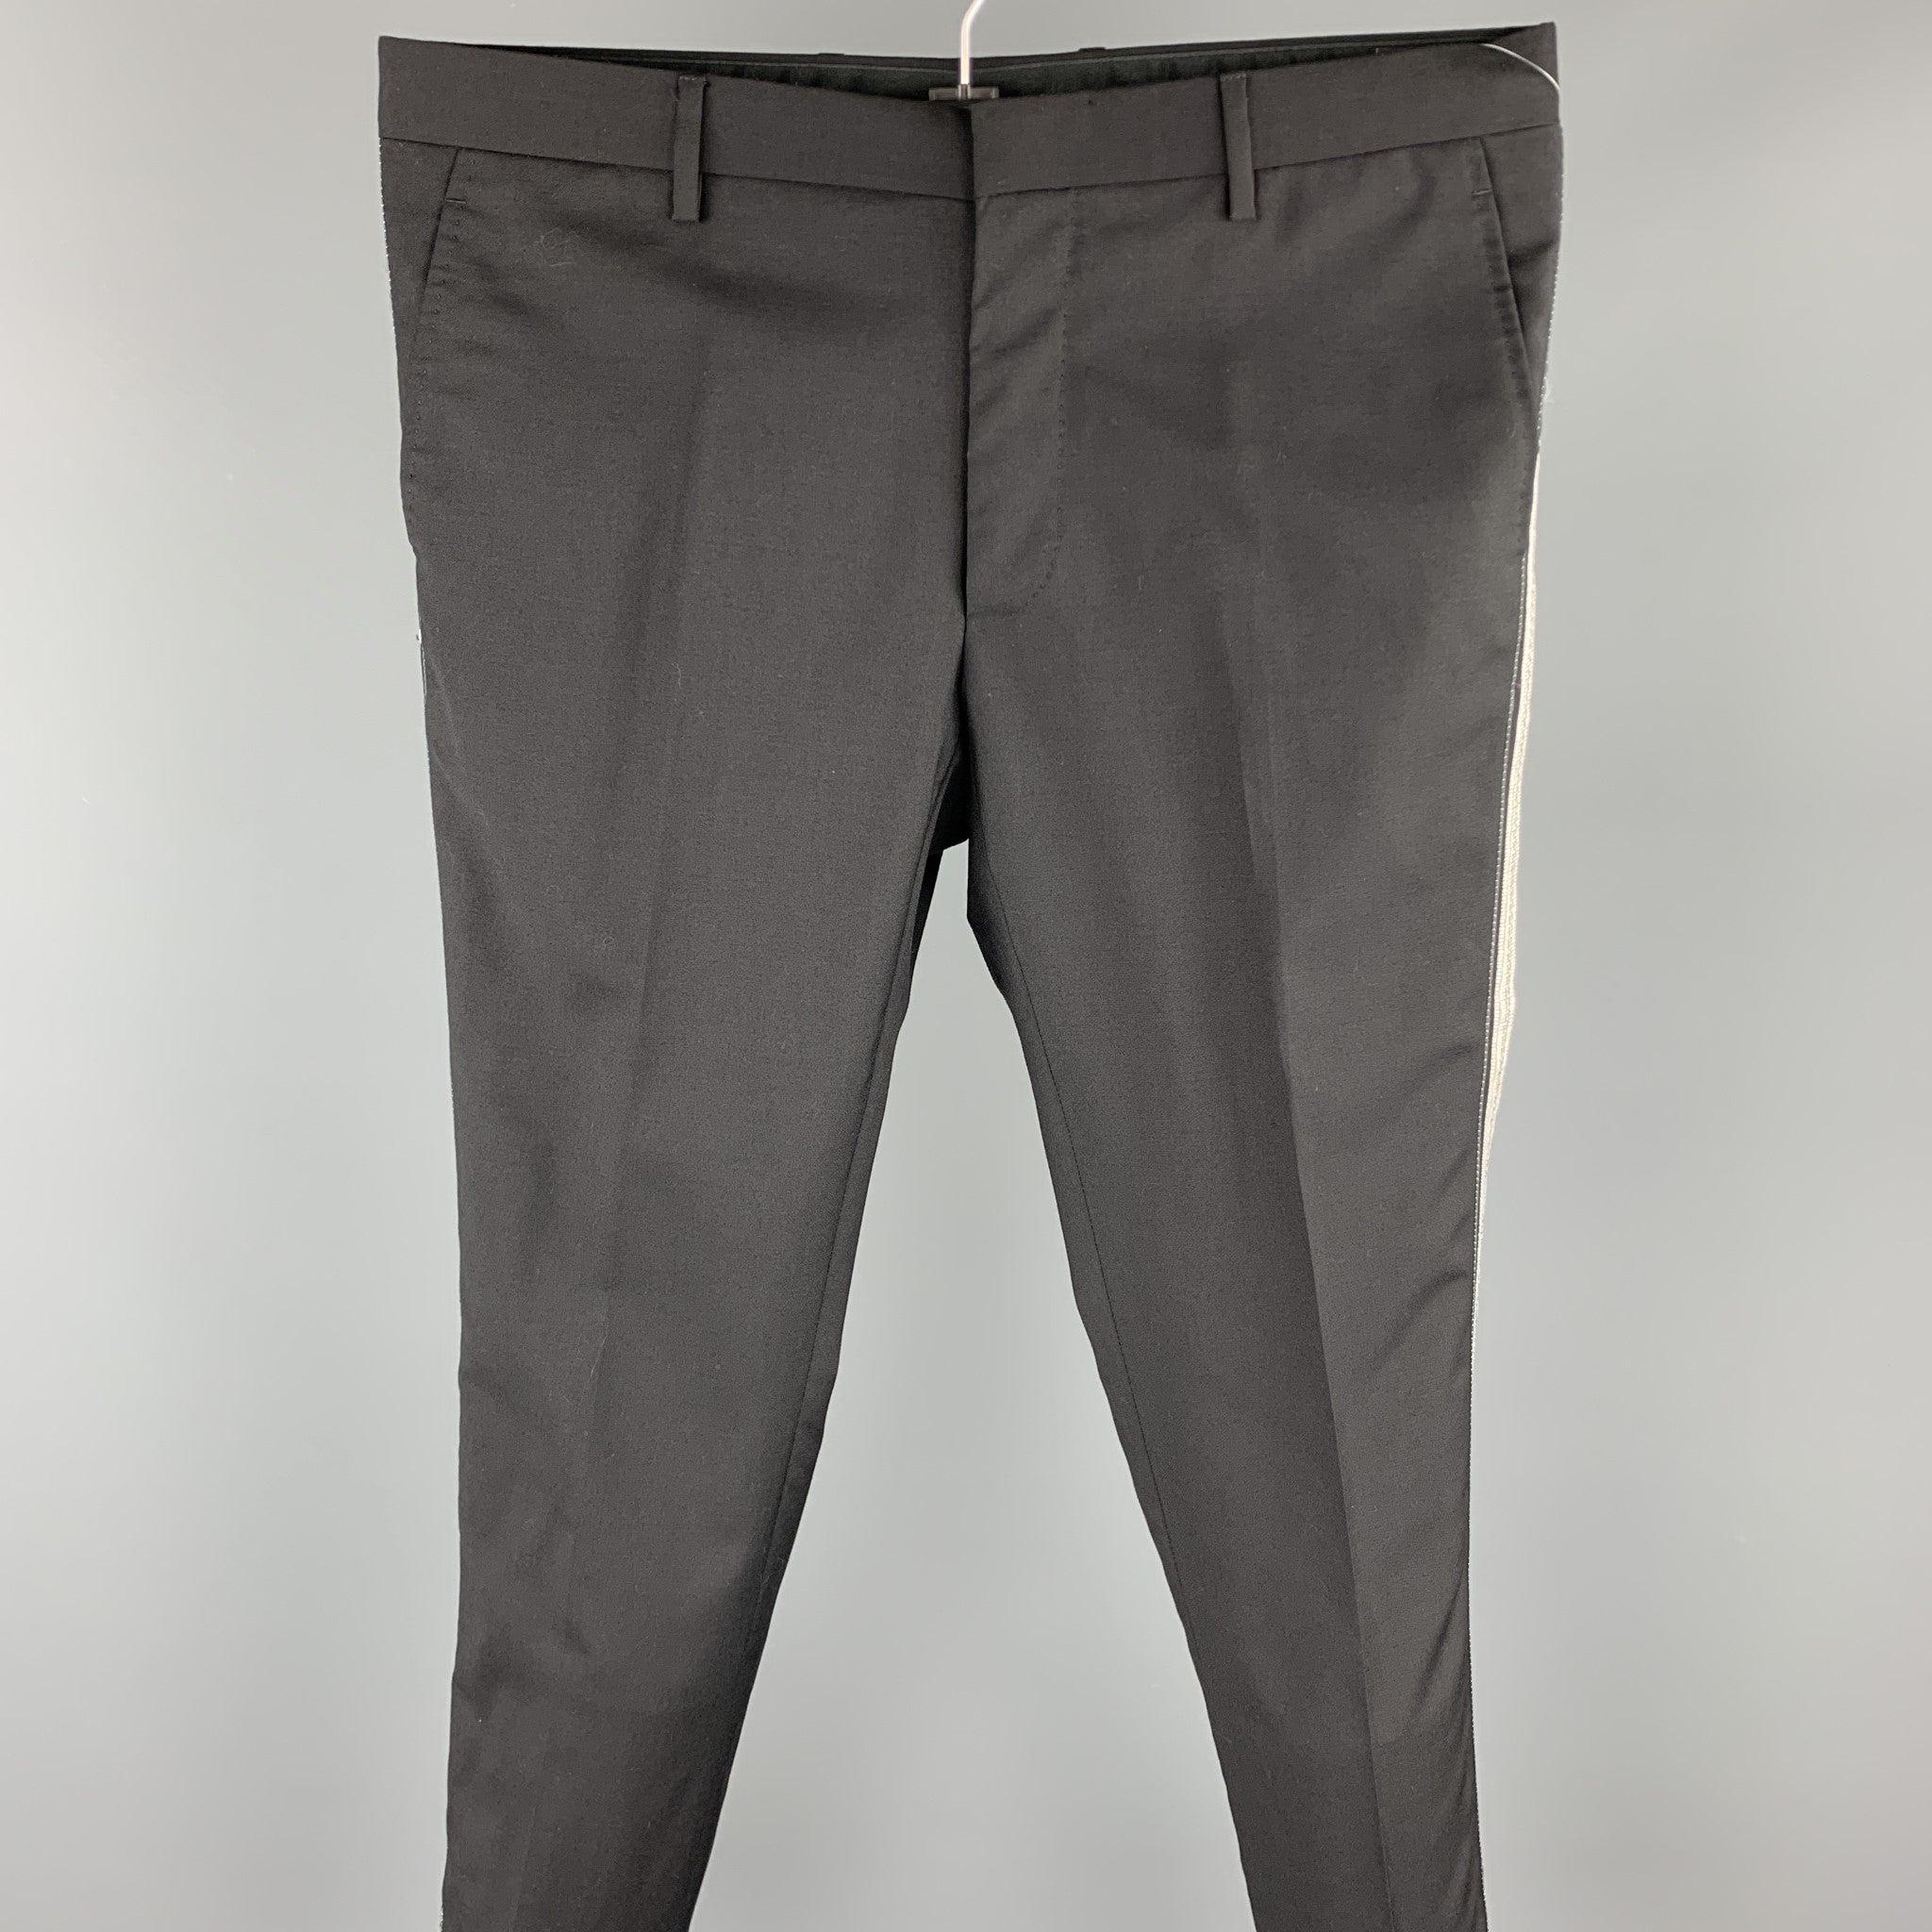 LANVIN dress pants comes in black wool featuring a flat front, fabric tuxedo stripe, zip fly closure. Made in Italy.Excellent
 Pre-Owned Condition. 
 

 Marked:  IT 48 
 

 Measurements: 
  Waist: 34 inches Rise: 8 inches 
 Inseam: 30 inches 
  
  
